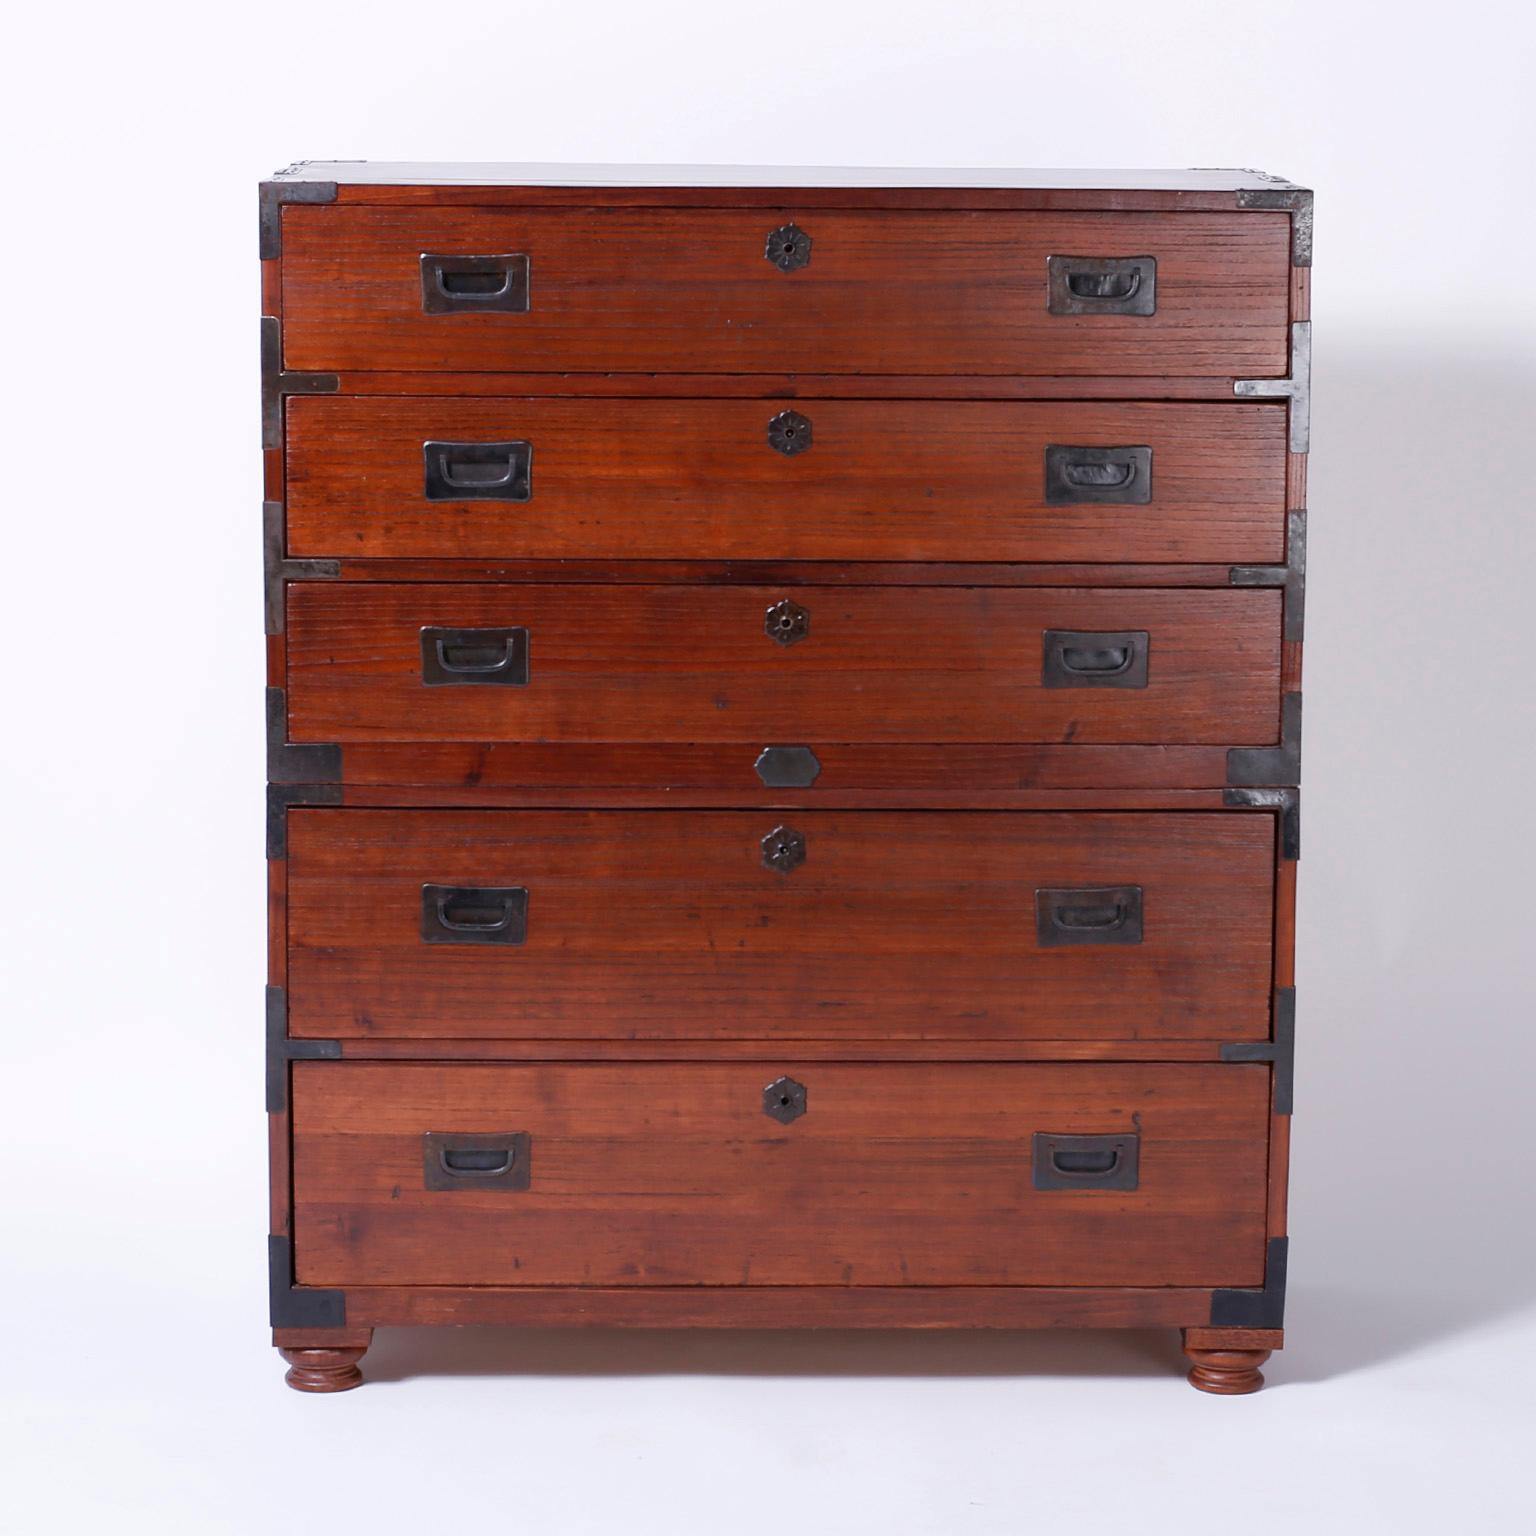 Antique Campaign chest of drawers or tanzu crafted in beautifully grained elmwood with five drawers, hand tooled hardware and a unique blend of Asian and European influences.